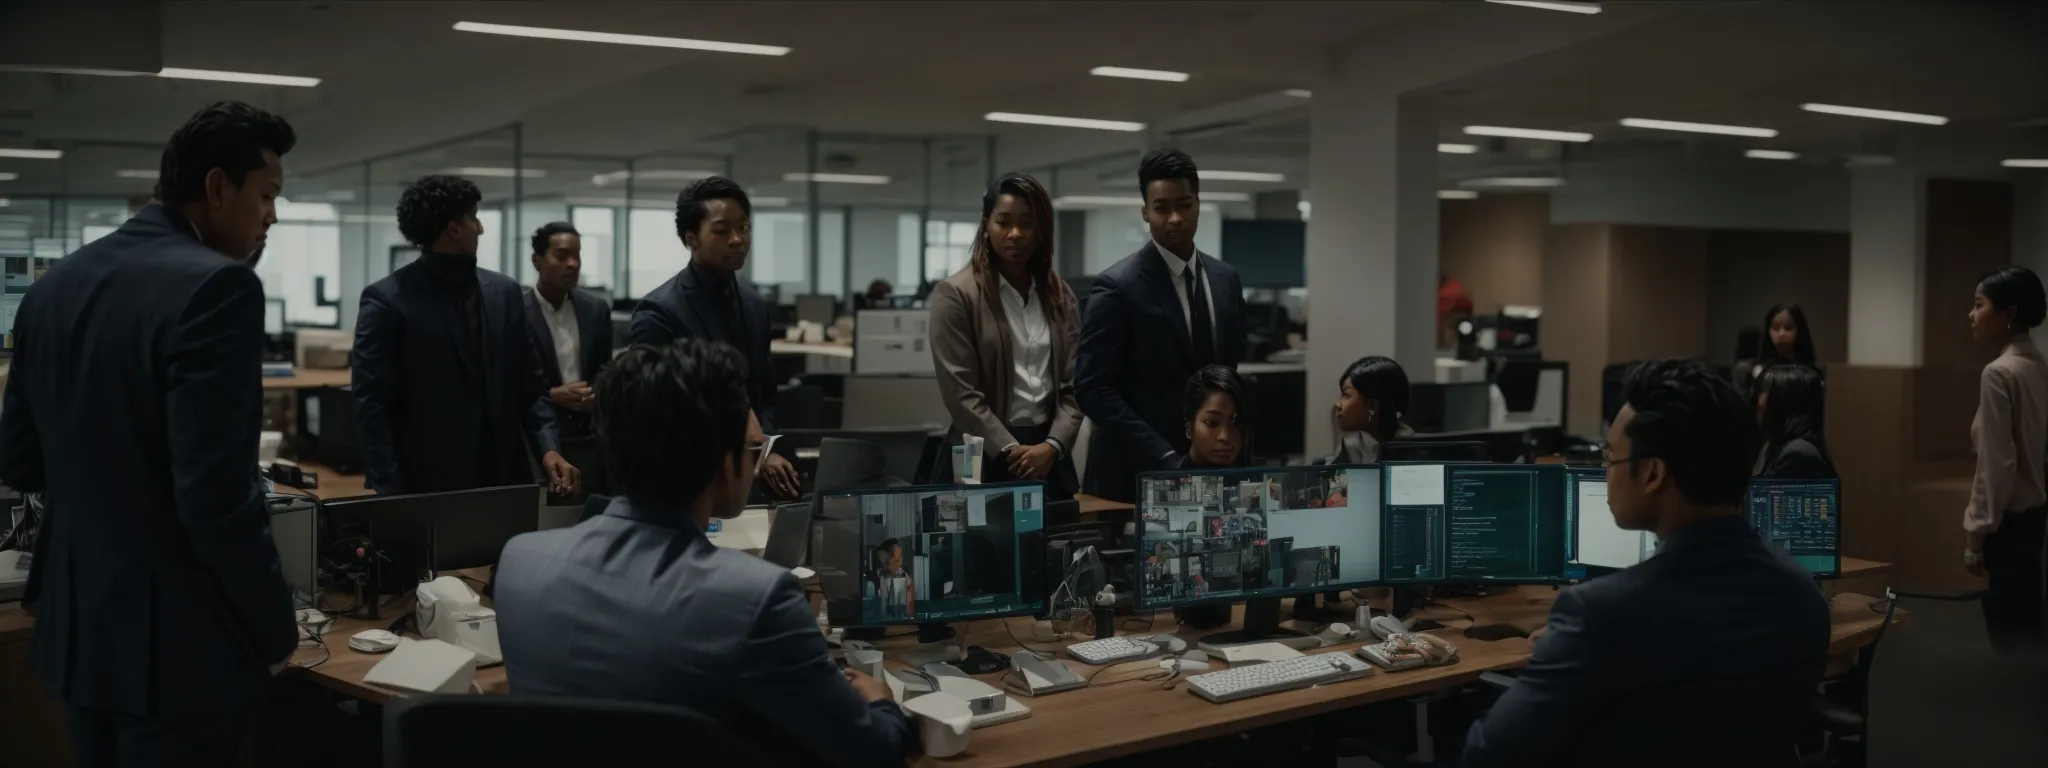 a diverse team strategizes around a computer in a modern office environment.